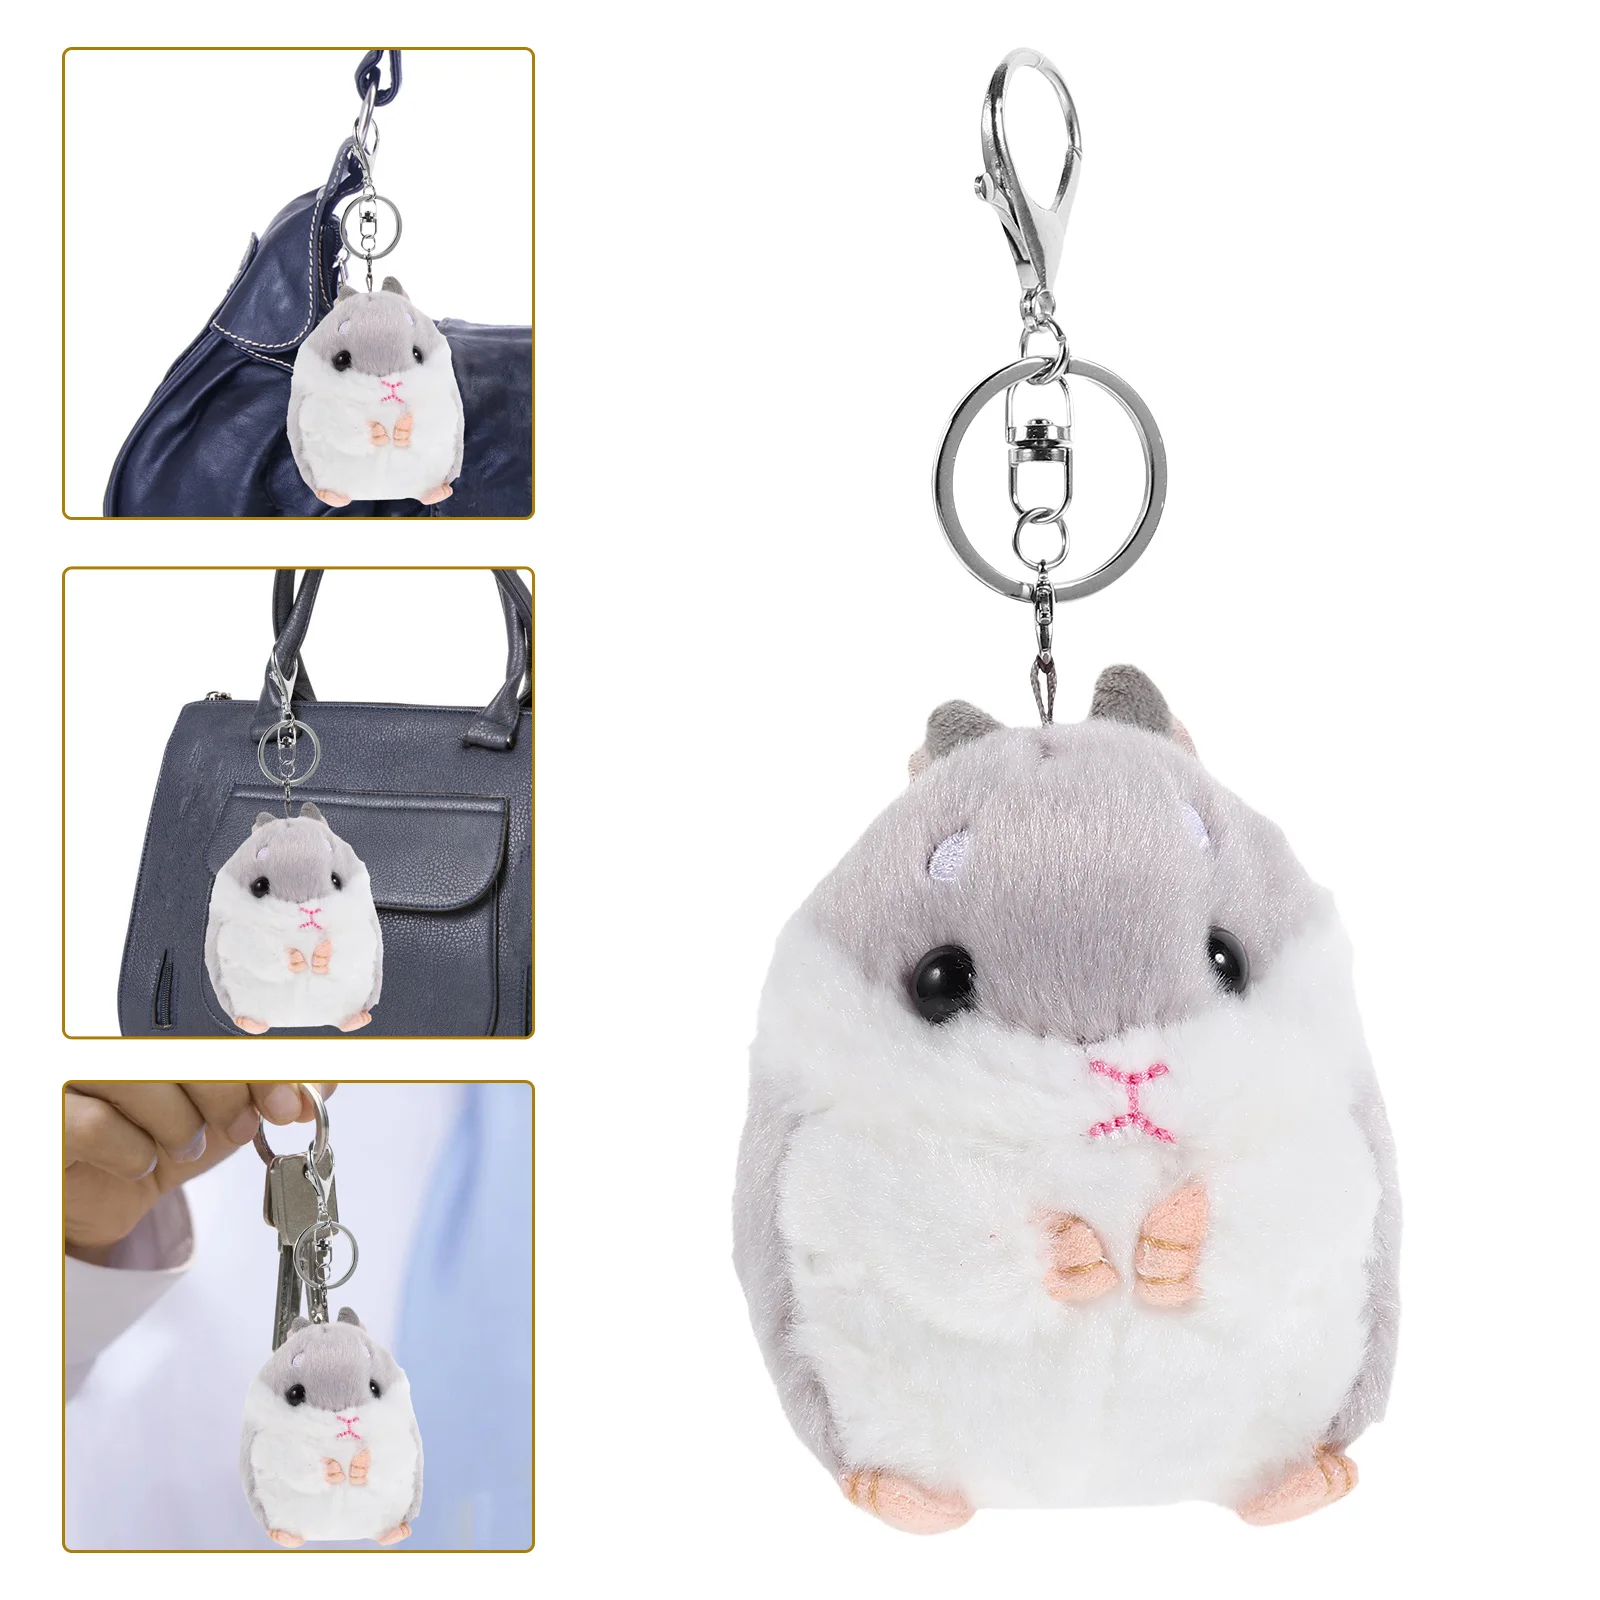 

1pc Plush Hamster Key Chain Backpack Ornaments, Little Plush Key Chain Decoration For The Theme Party, Kindergarten Gift, Candy